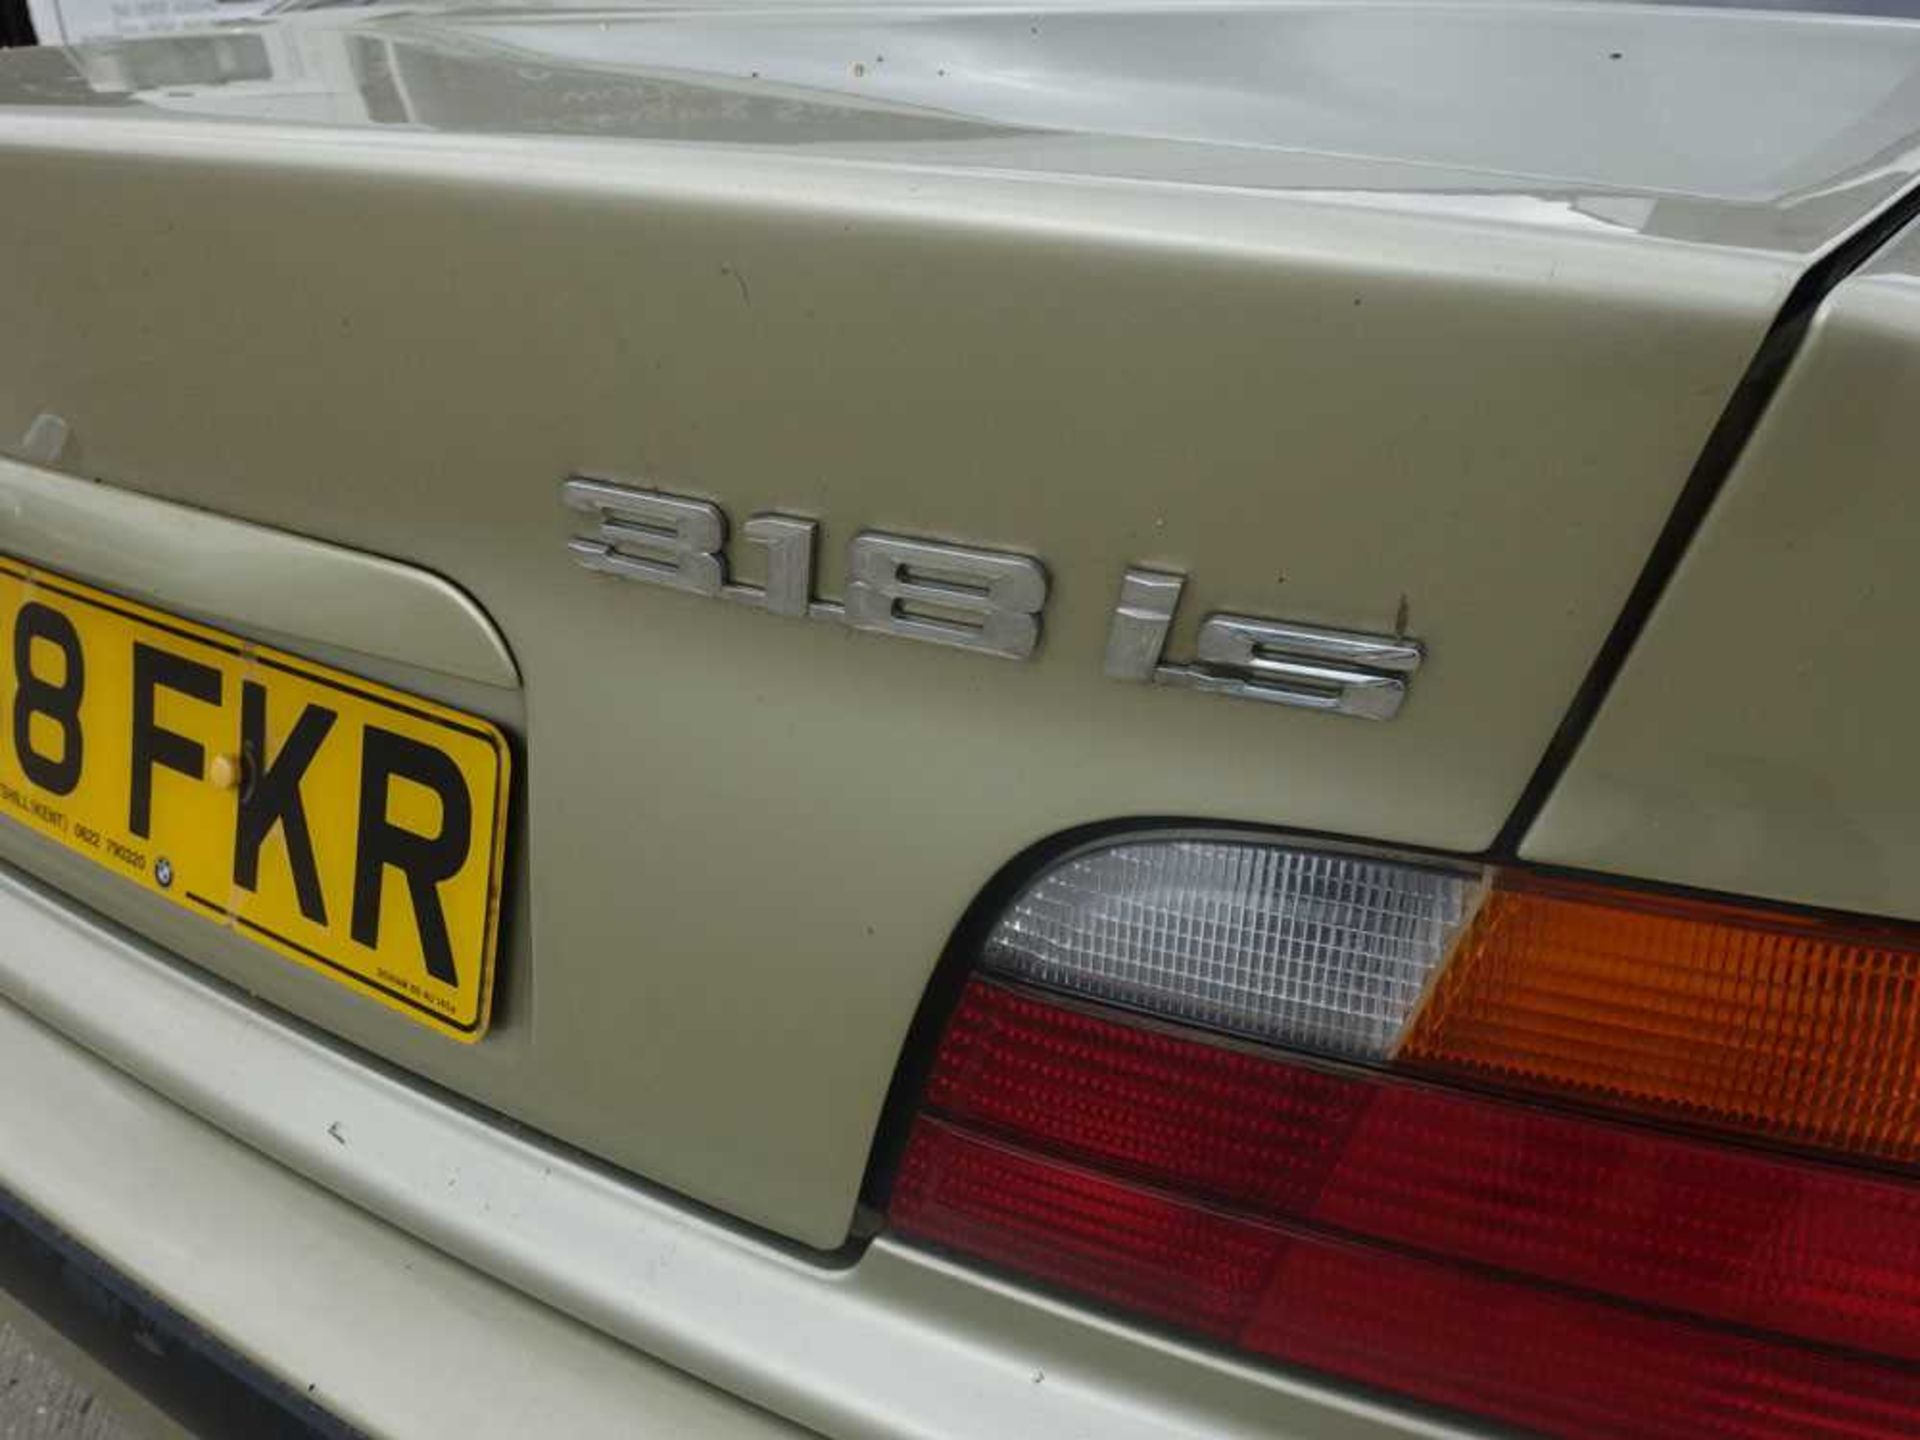 BMW 318 i S Auto Coupe in gold, first registered 16.04.1994, registration plate L868 FKR, 2 door, - Image 7 of 12